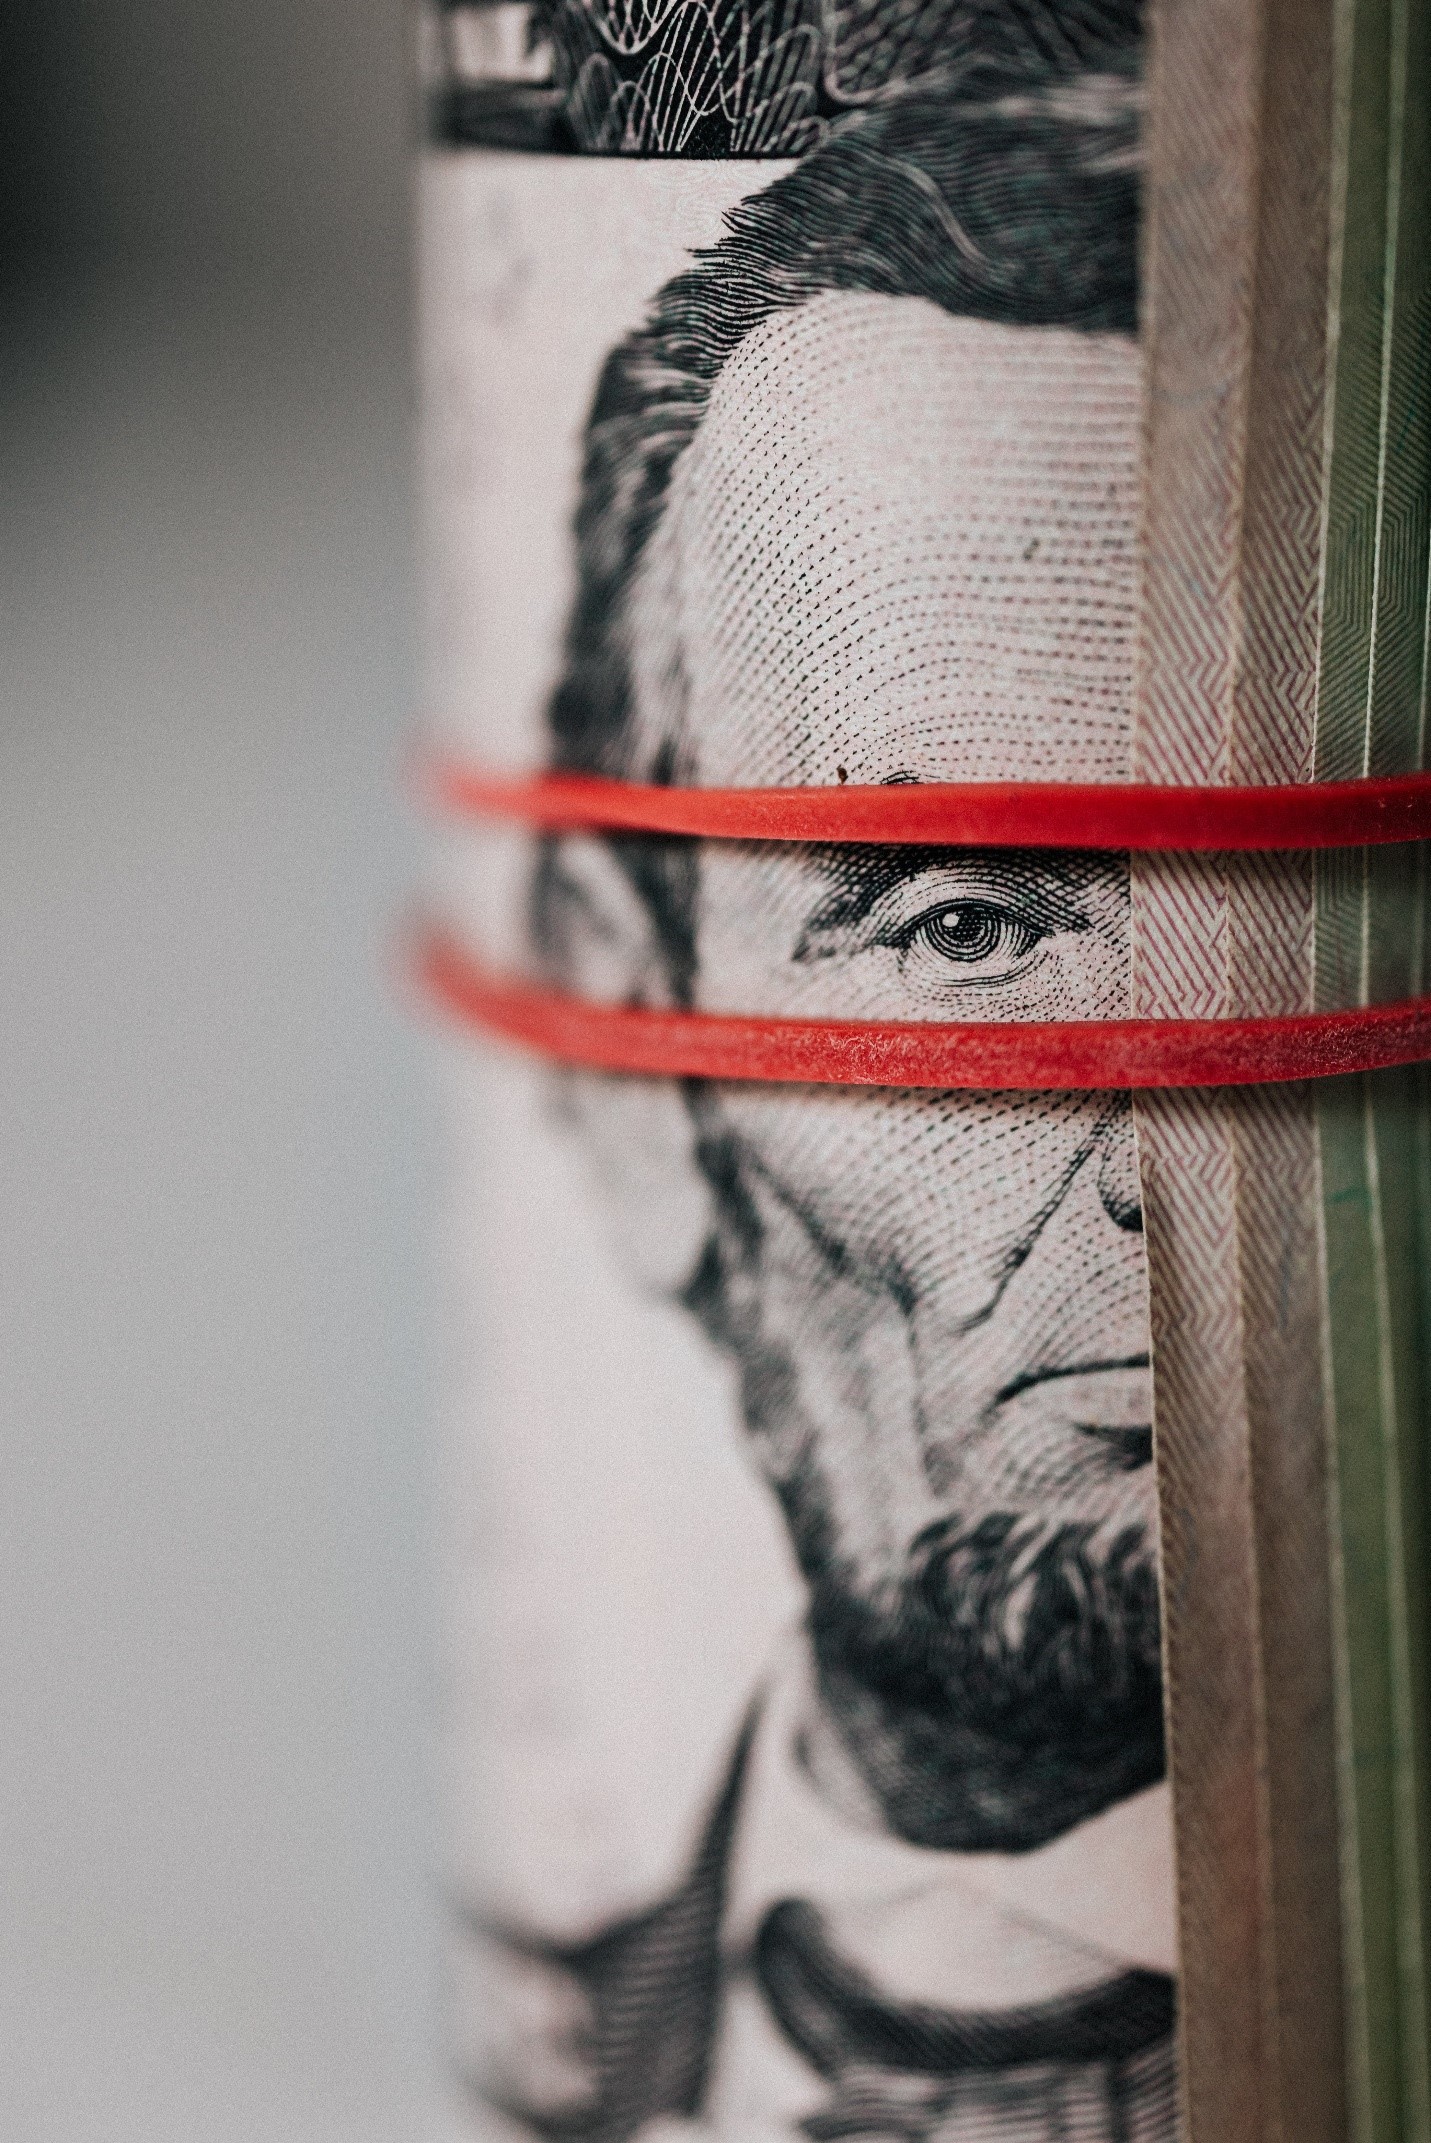 Source: Roll of American dollar banknotes tightened with band · Free Stock Photo (pexels.com)